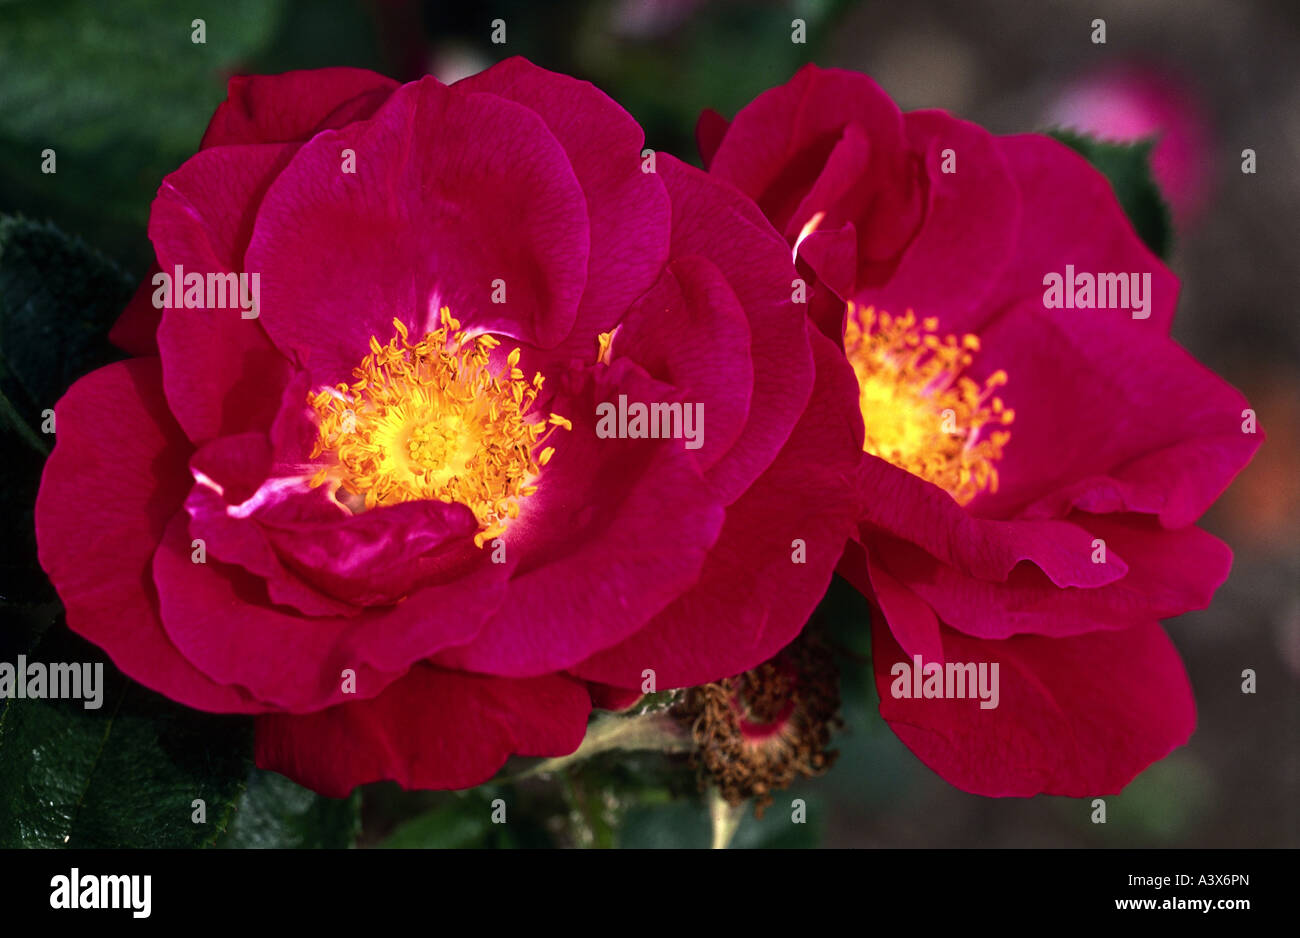 'botany, Rosa, 'Gallic Rose' (Rosa gallica), two flowers, bloom, blooming, flowering, flower, French Rose, Rose of Provinces, Stock Photo